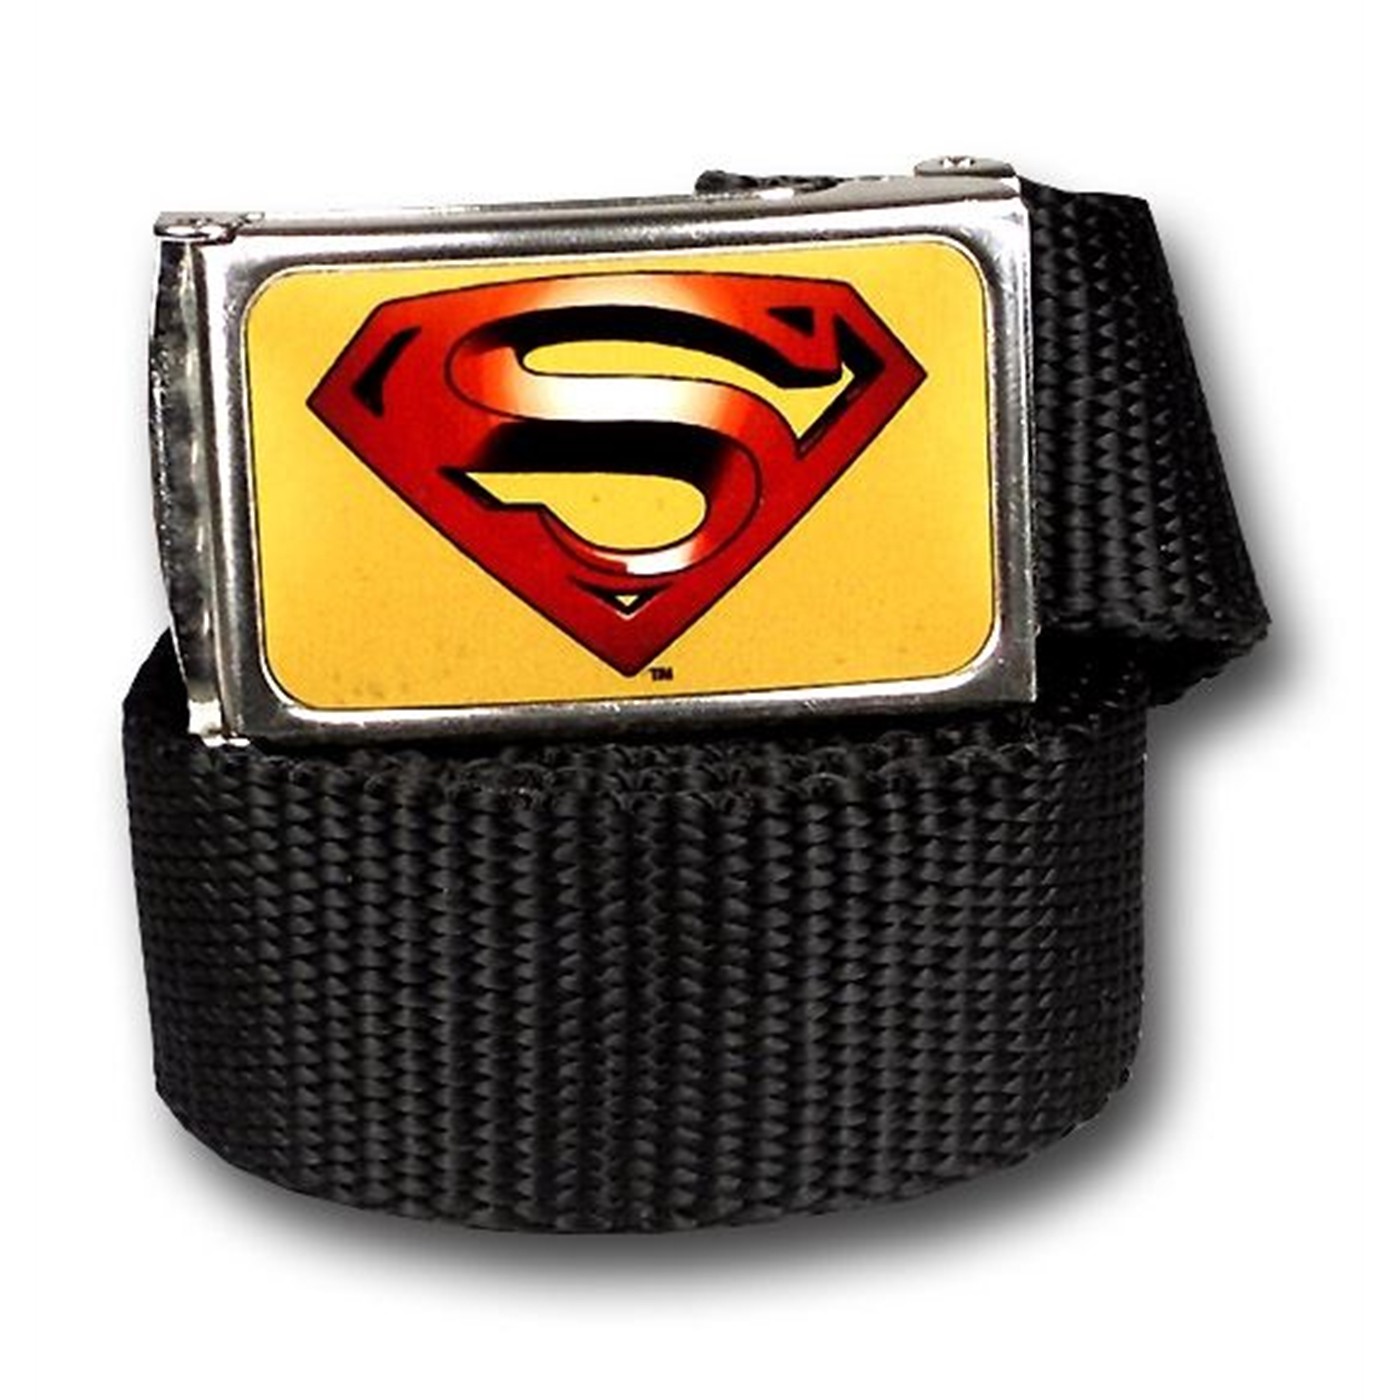 Superman Returns Red and Yellow Web Belt